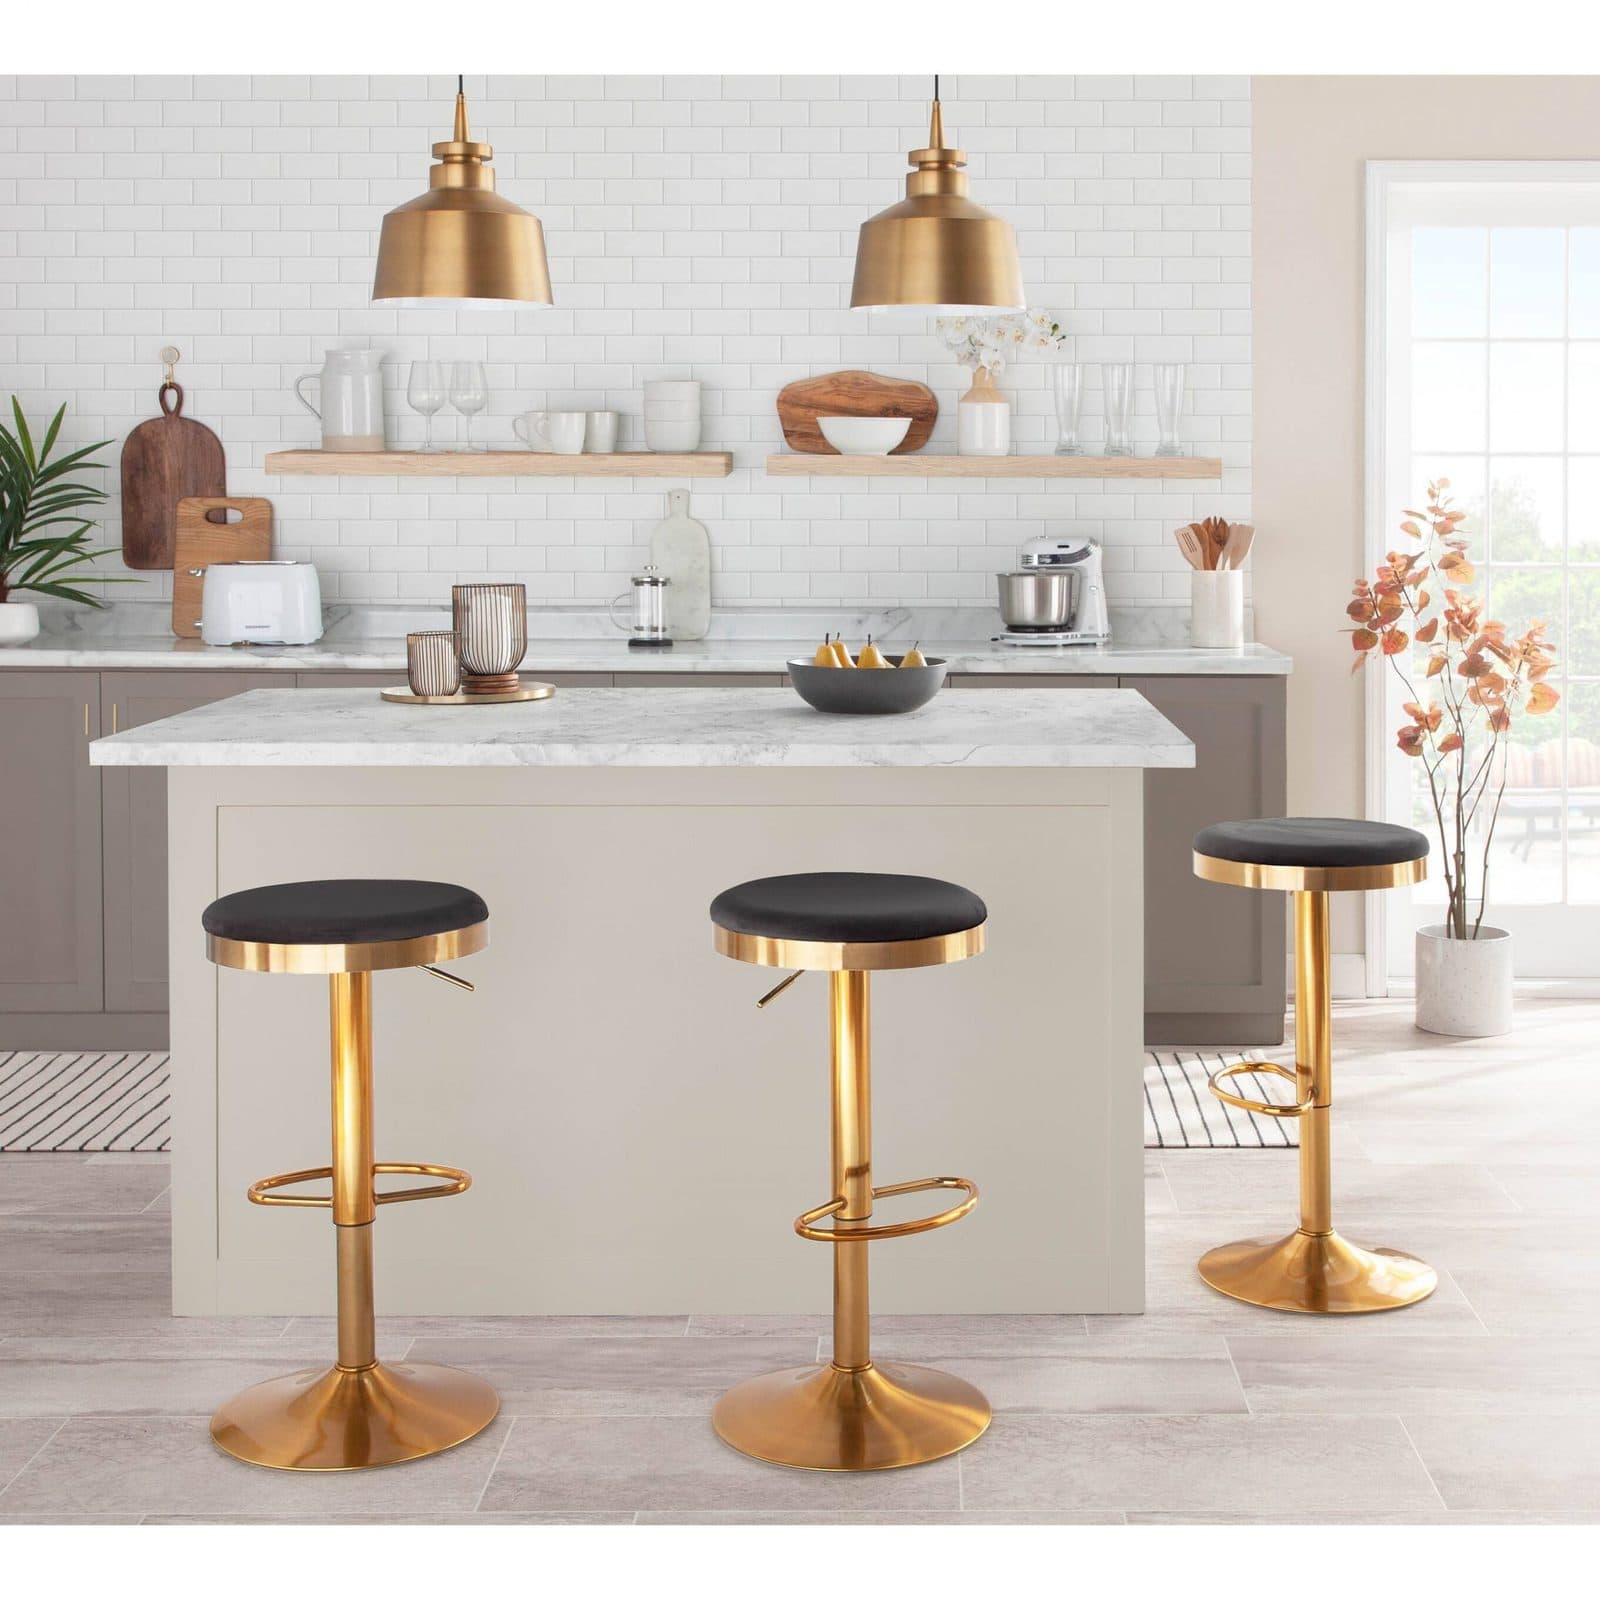 15 Best Stools For Kitchen Island, Small Kitchen Island With Bar Stools